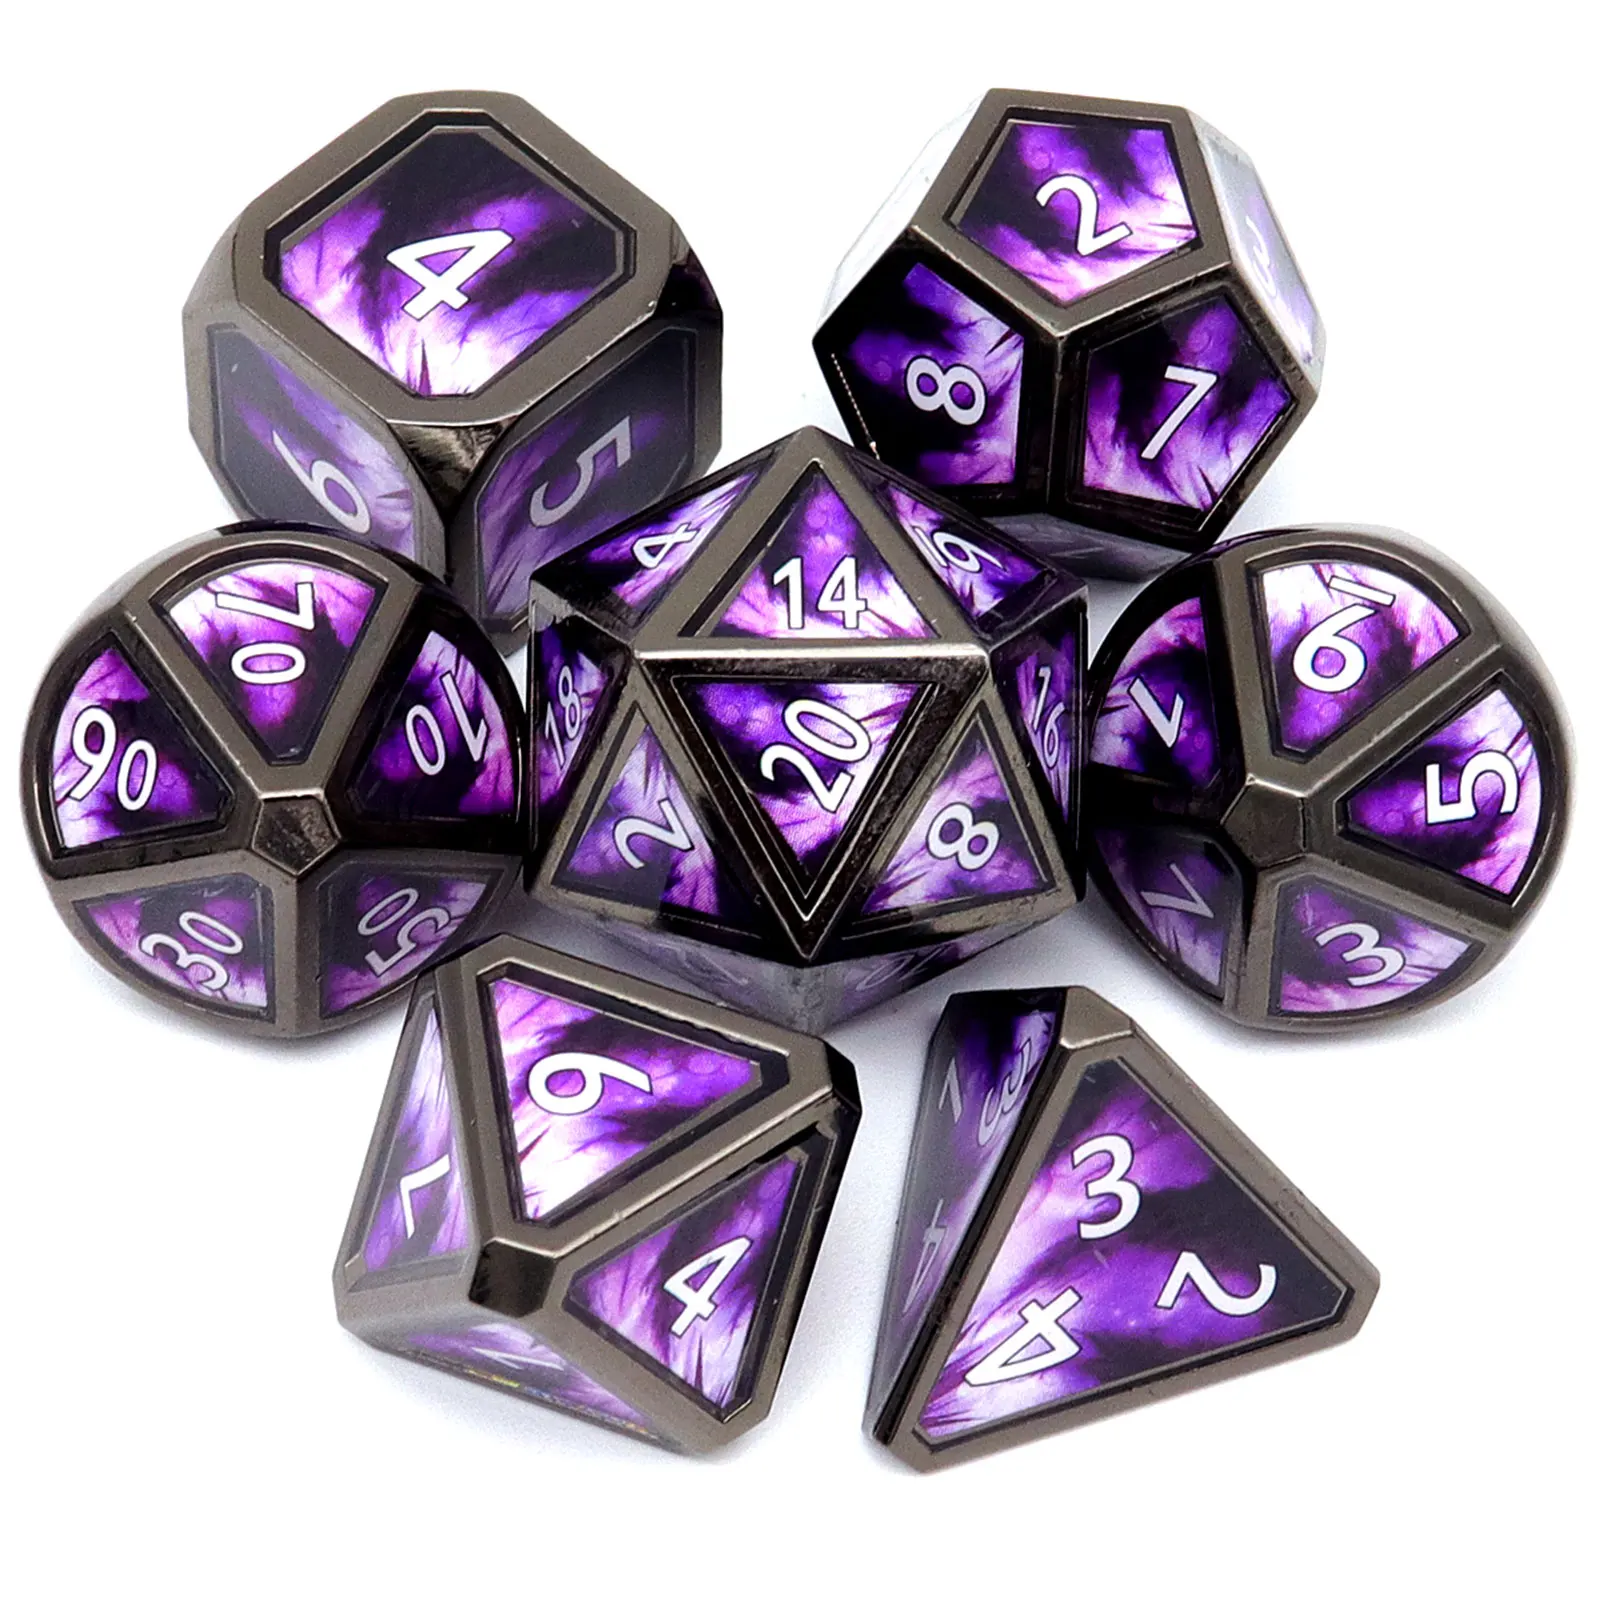 Haxtec Metal DND Dice Set Real Scene Black Polyhedral D&D Dice Set for Dungeons Dragons RPG Games